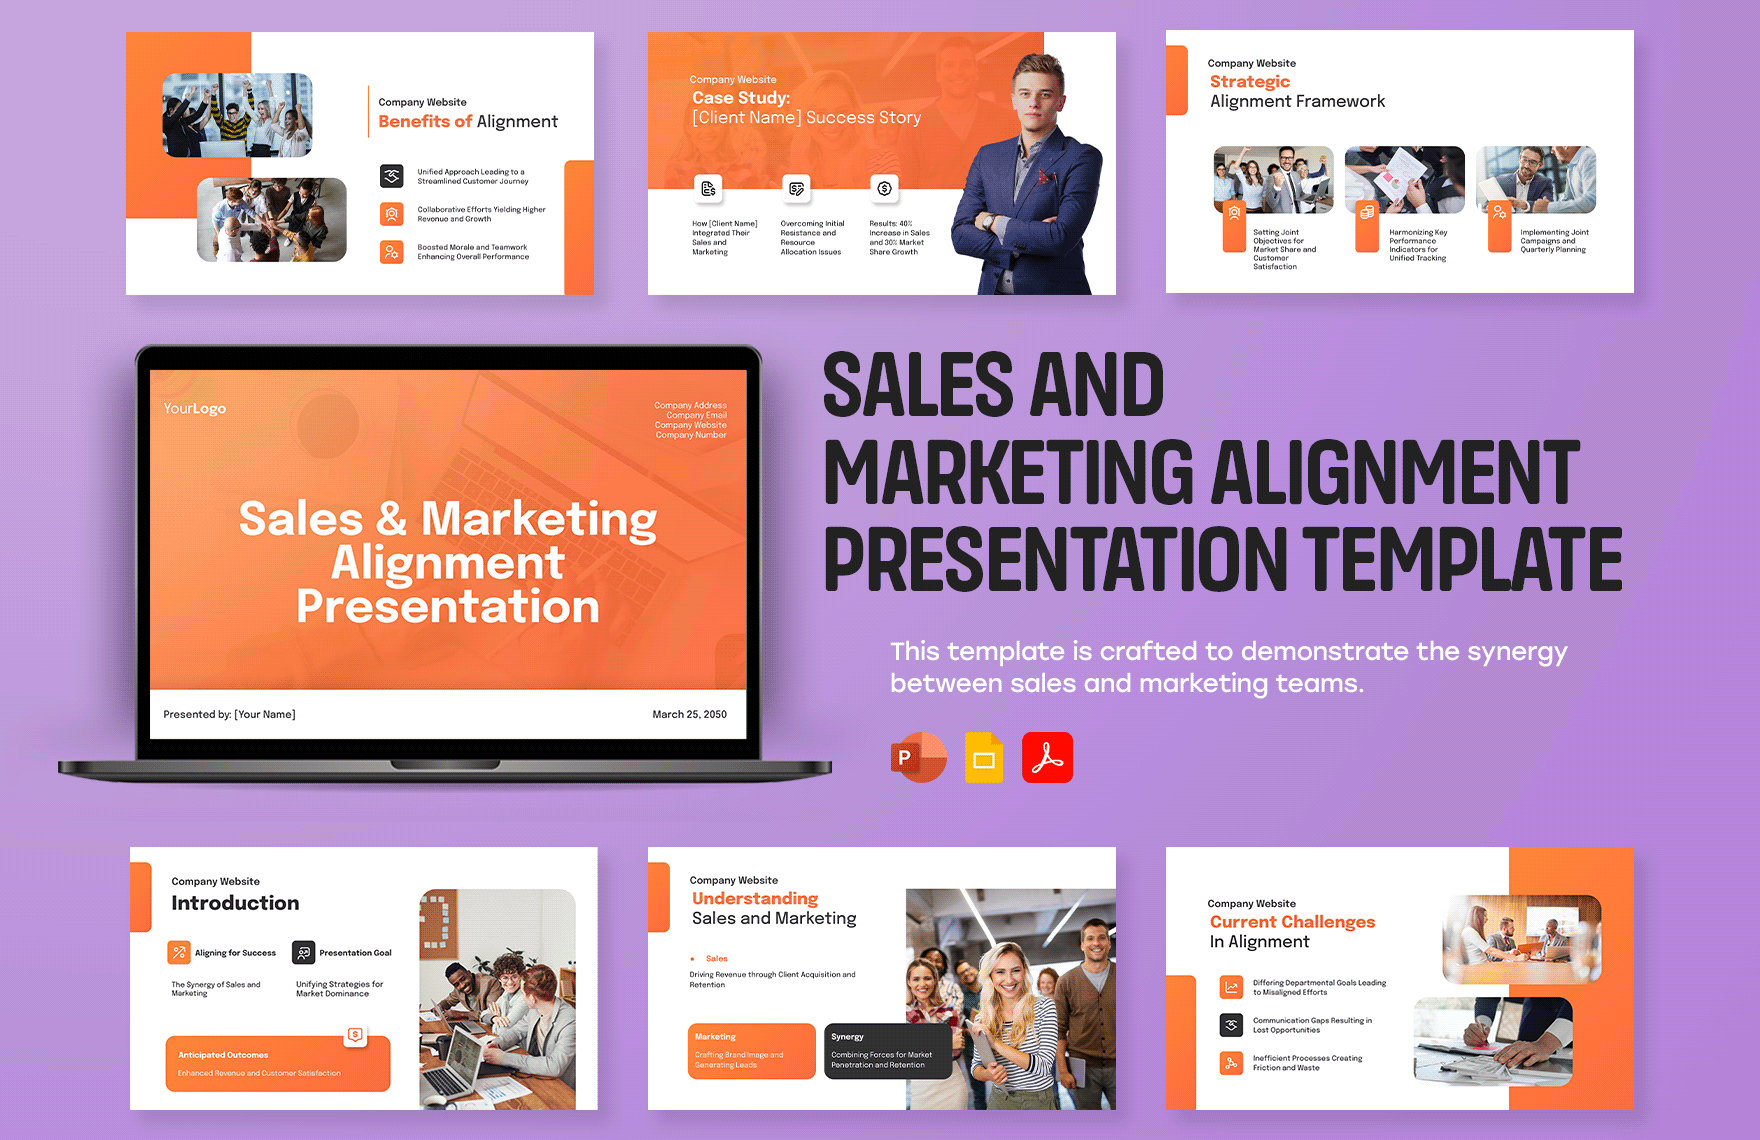 Sales and Marketing Alignment Presentation Template